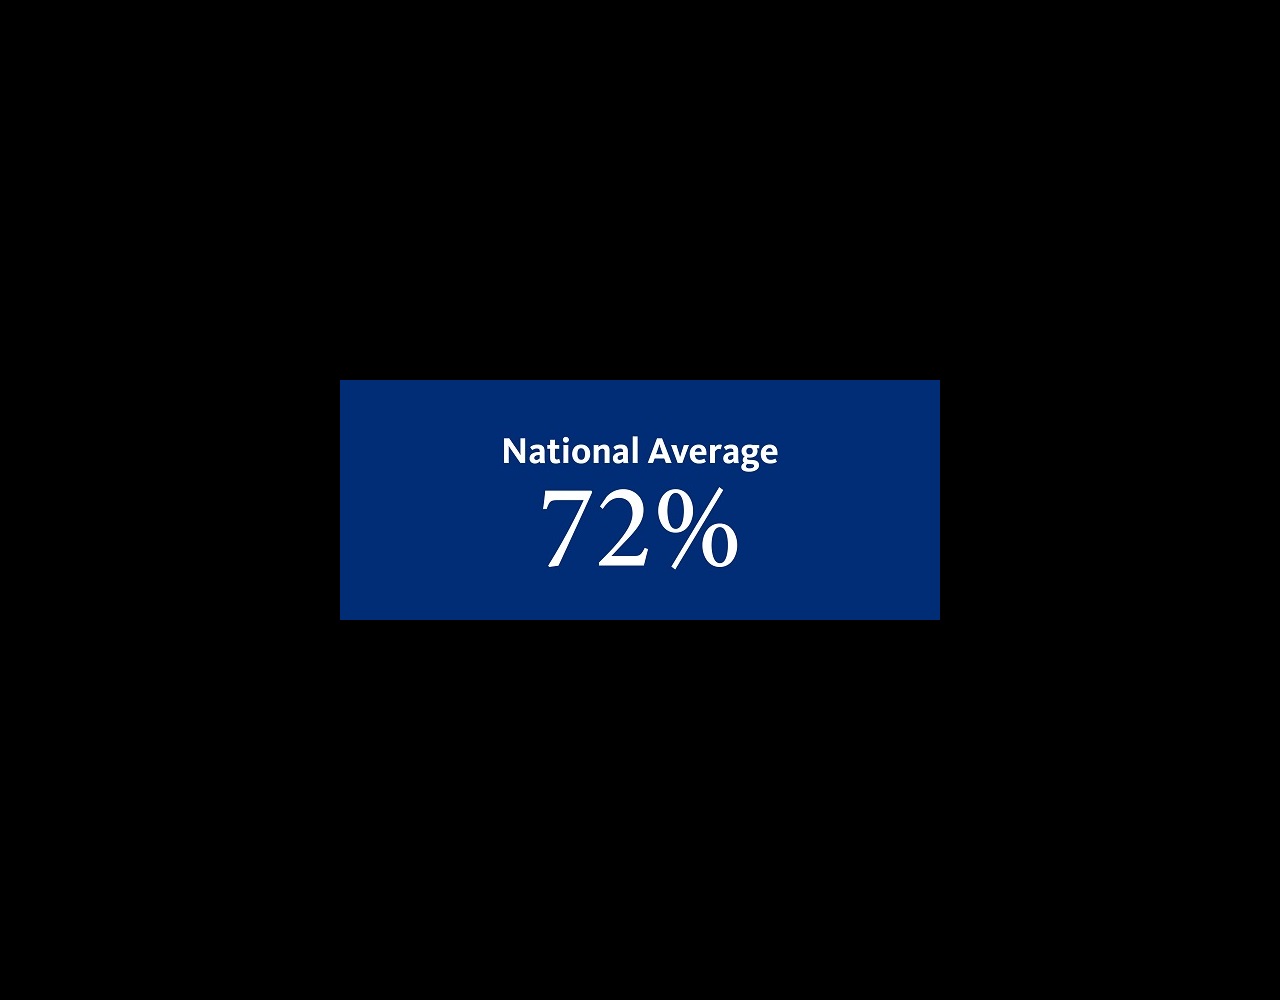 National average overall recommendation